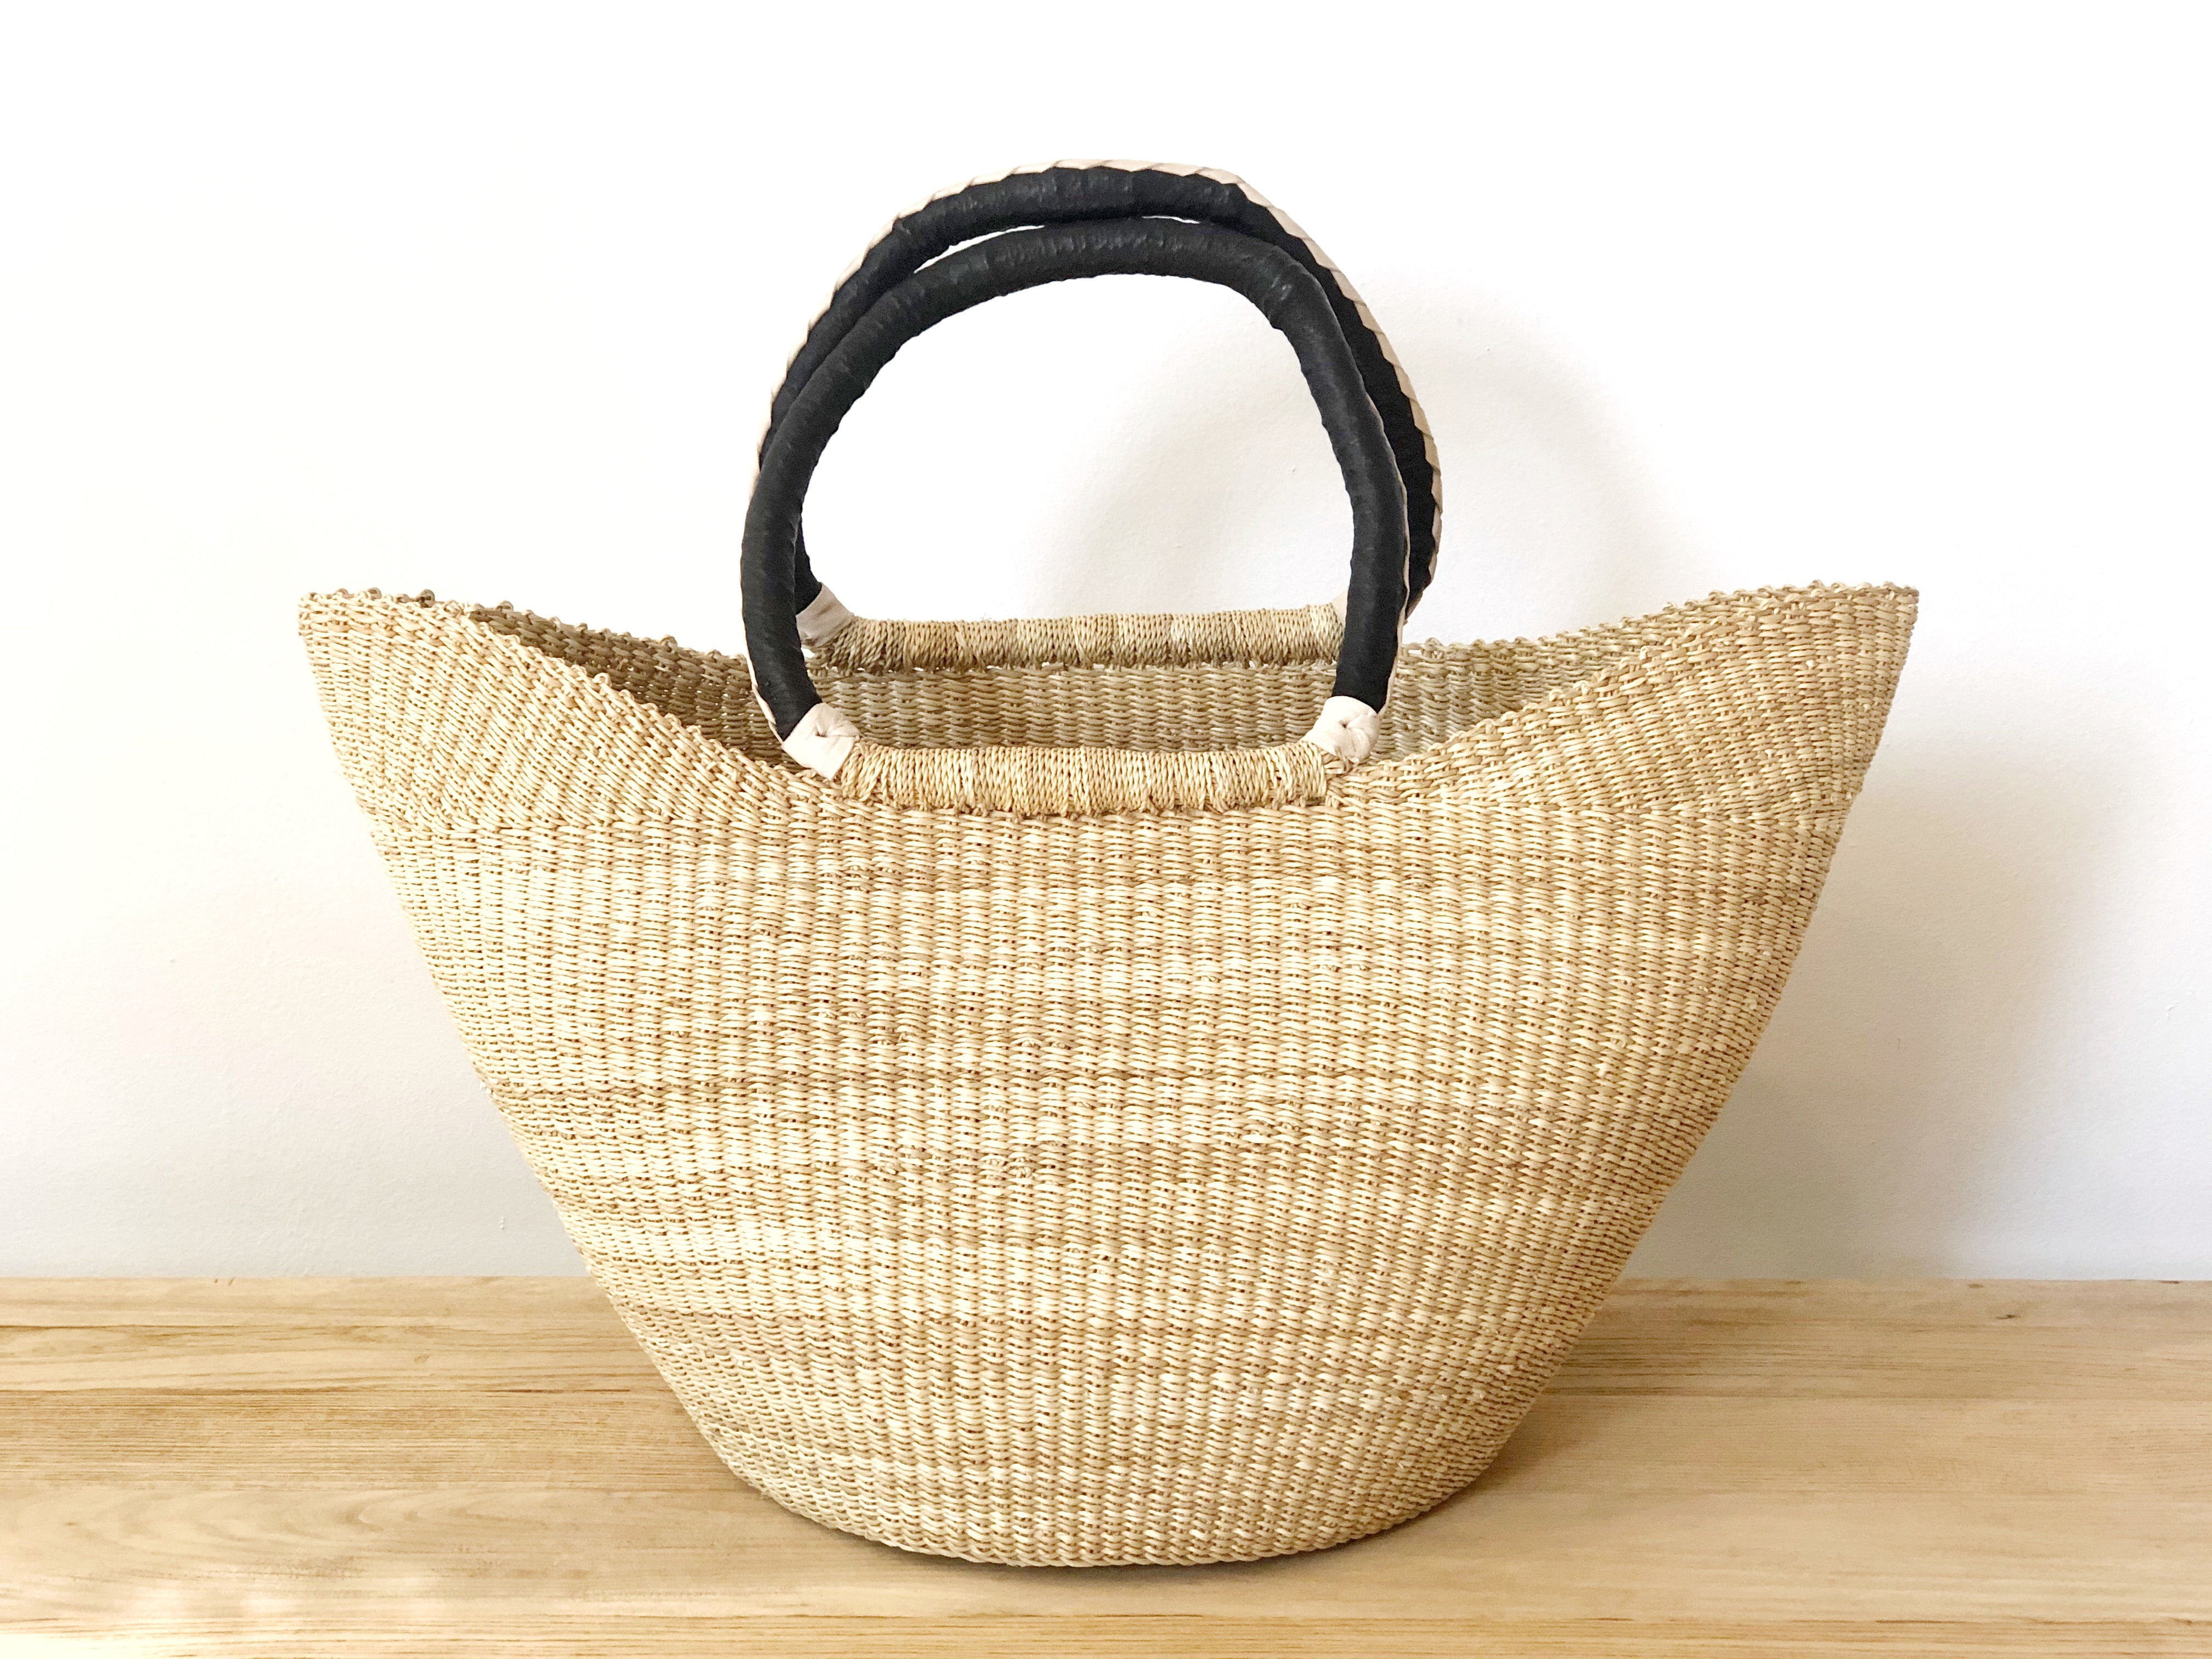 Handwoven Basket Tote with Black and Cream Braid Leather Handles